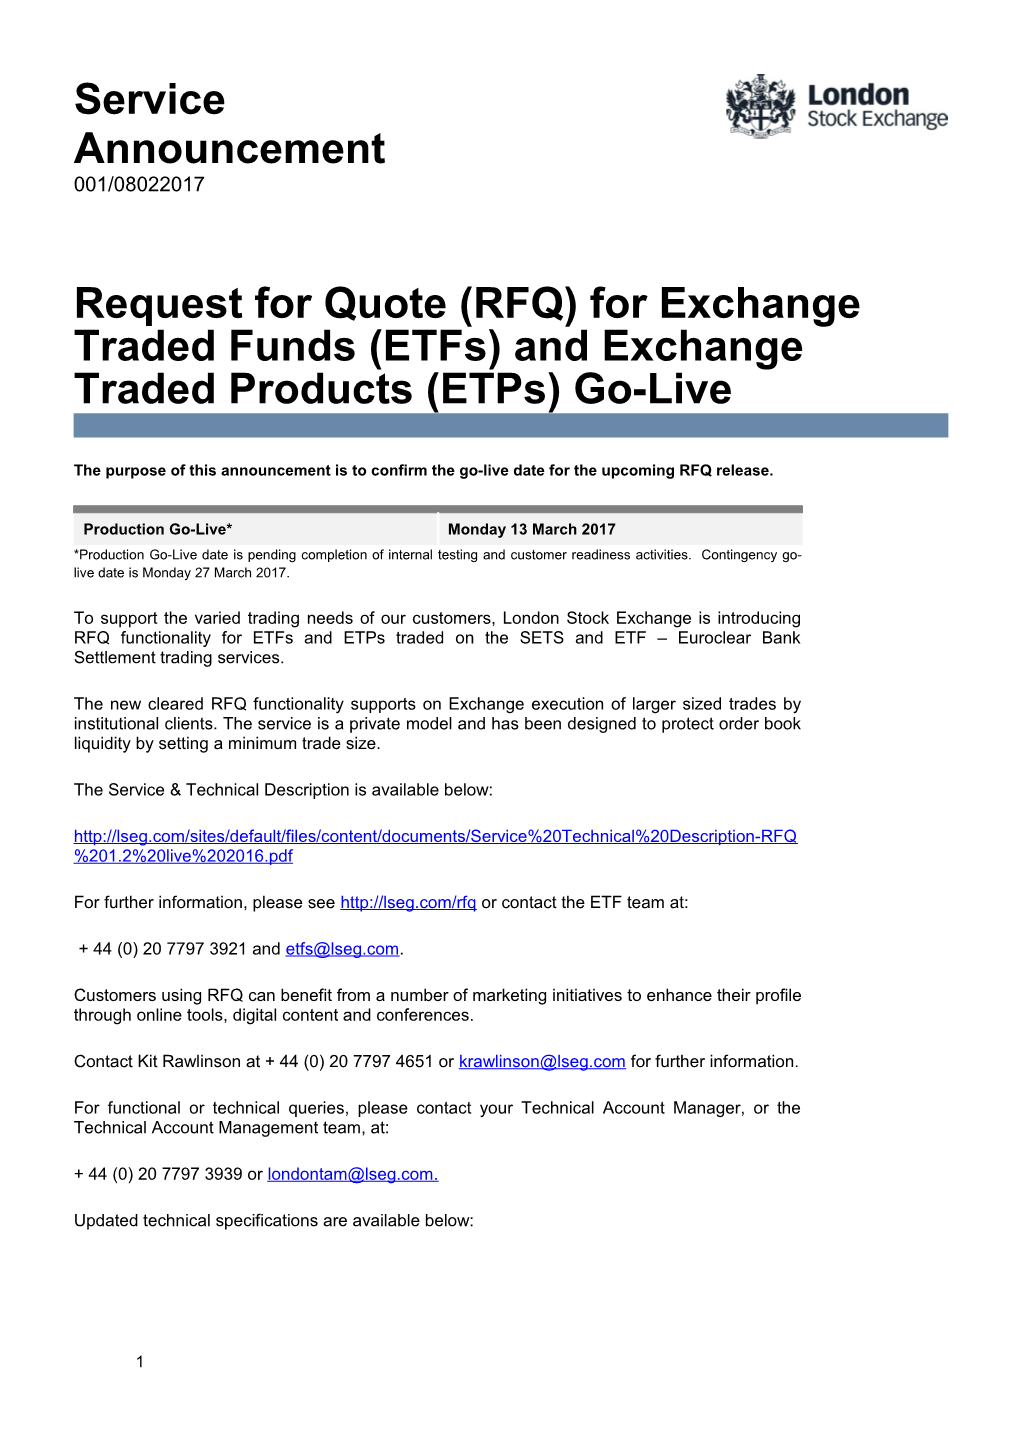 Request for Quote (RFQ) for Exchange Traded Funds (Etfs) and Exchange Traded Products (Etps)